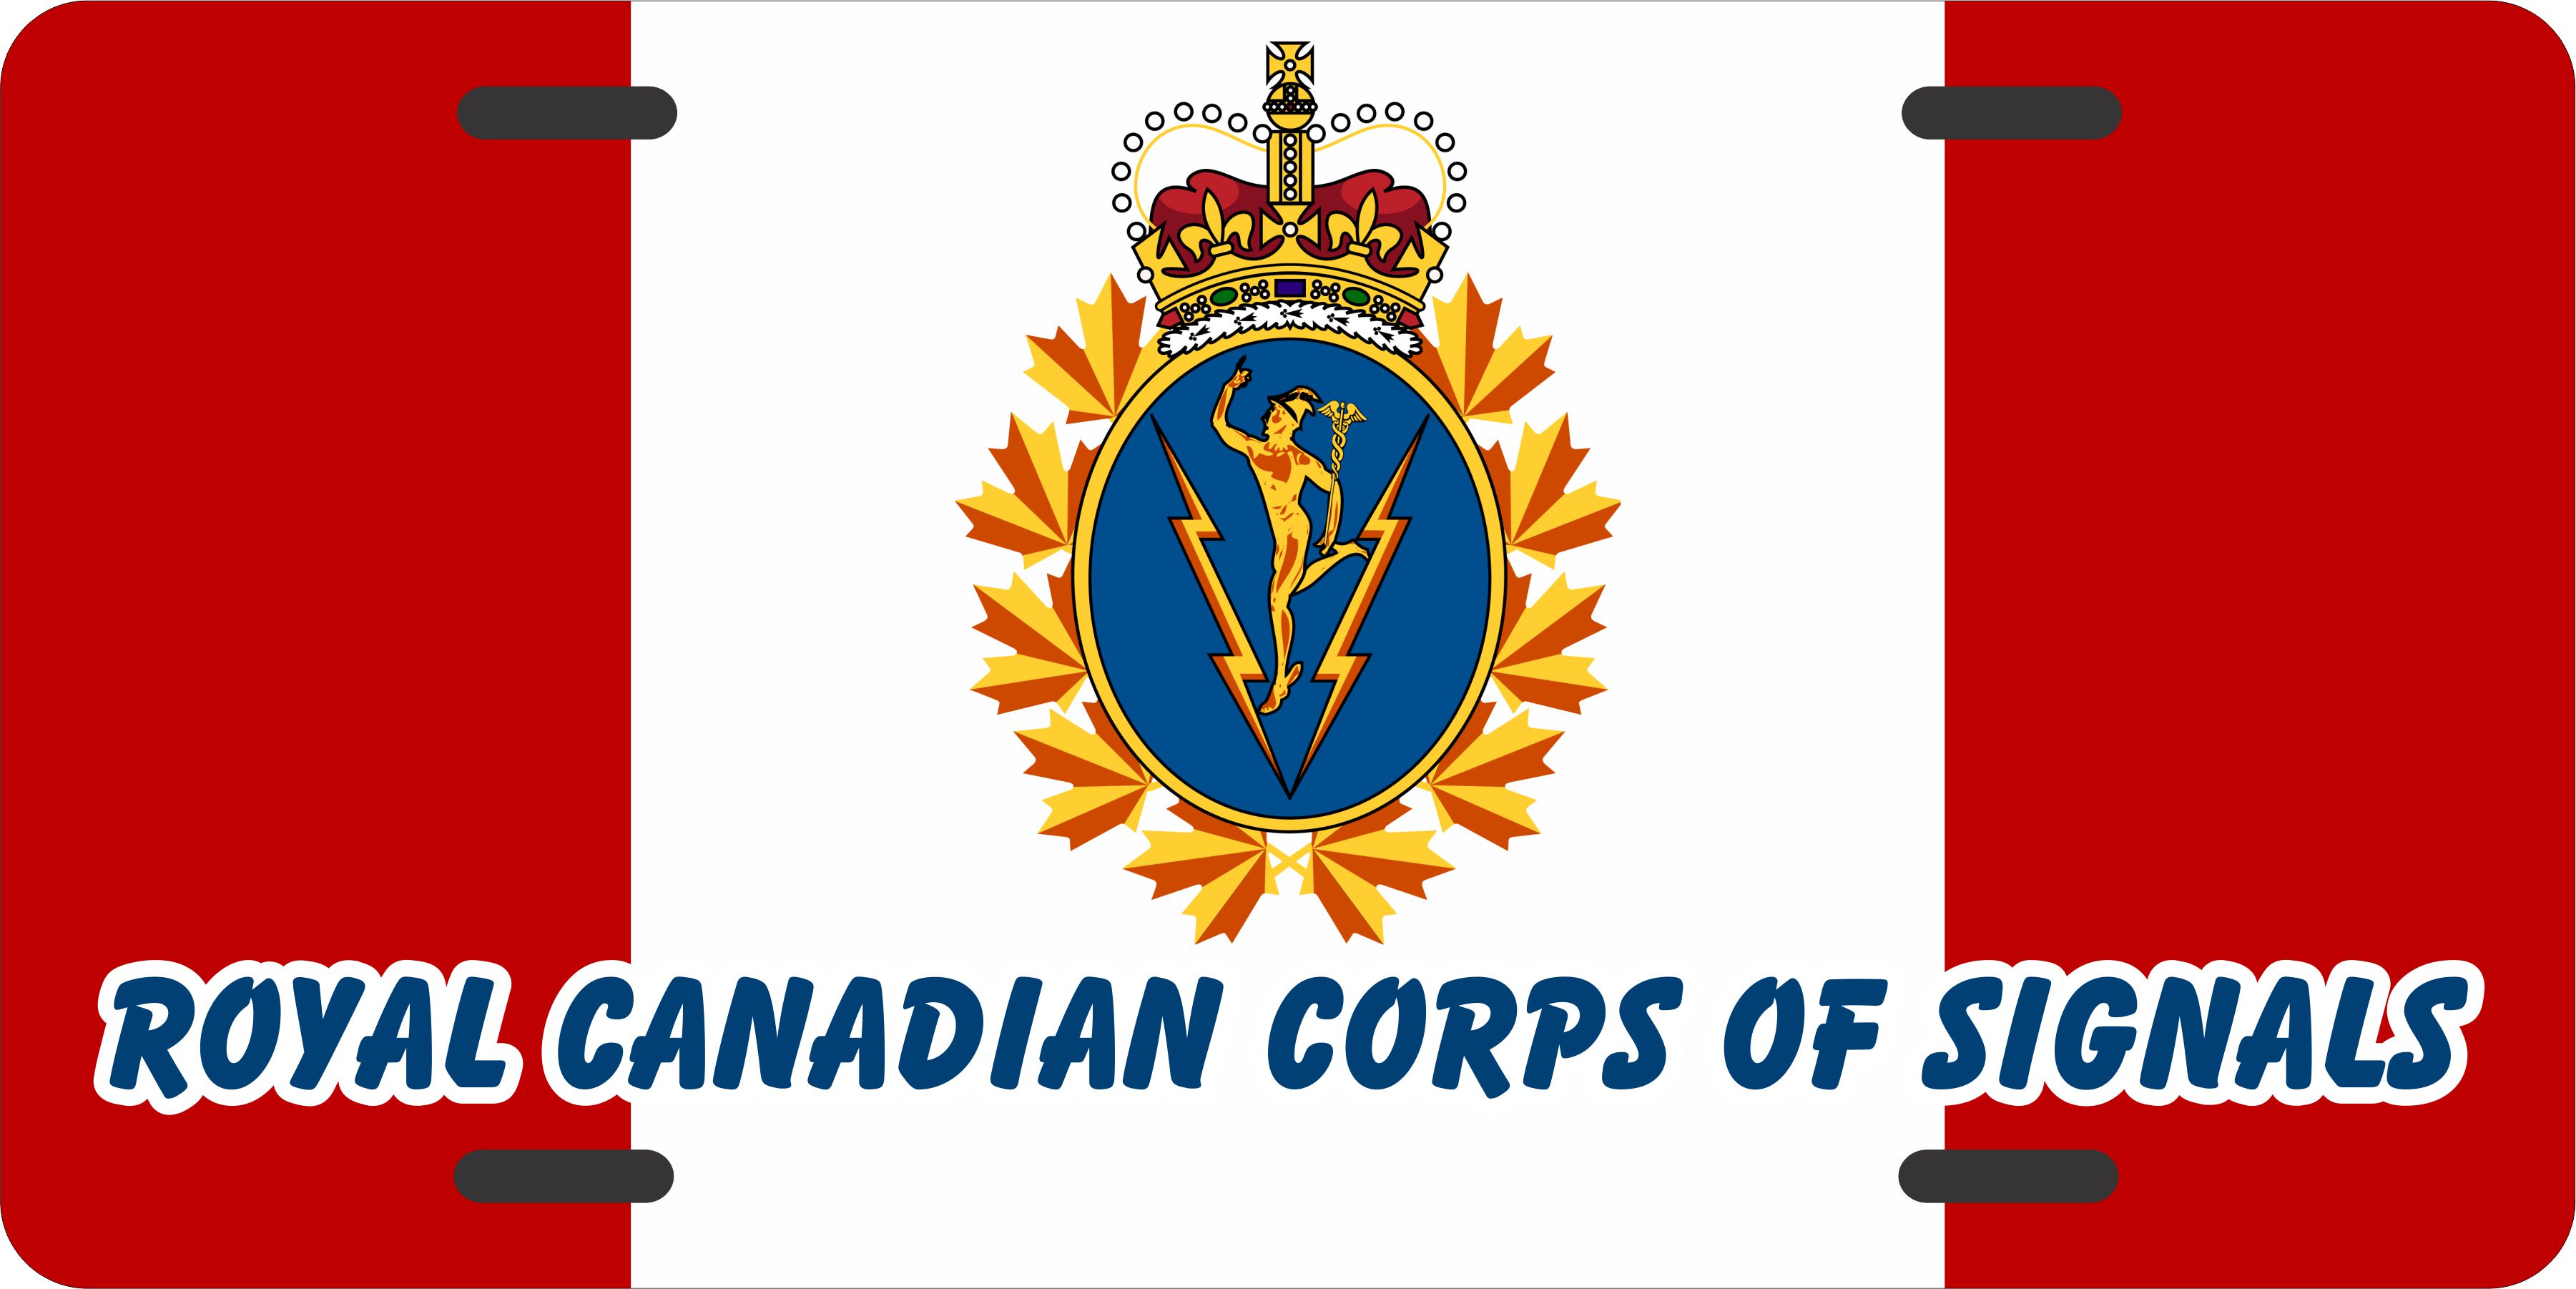 Royal Canadian Corps of Signals License Plates